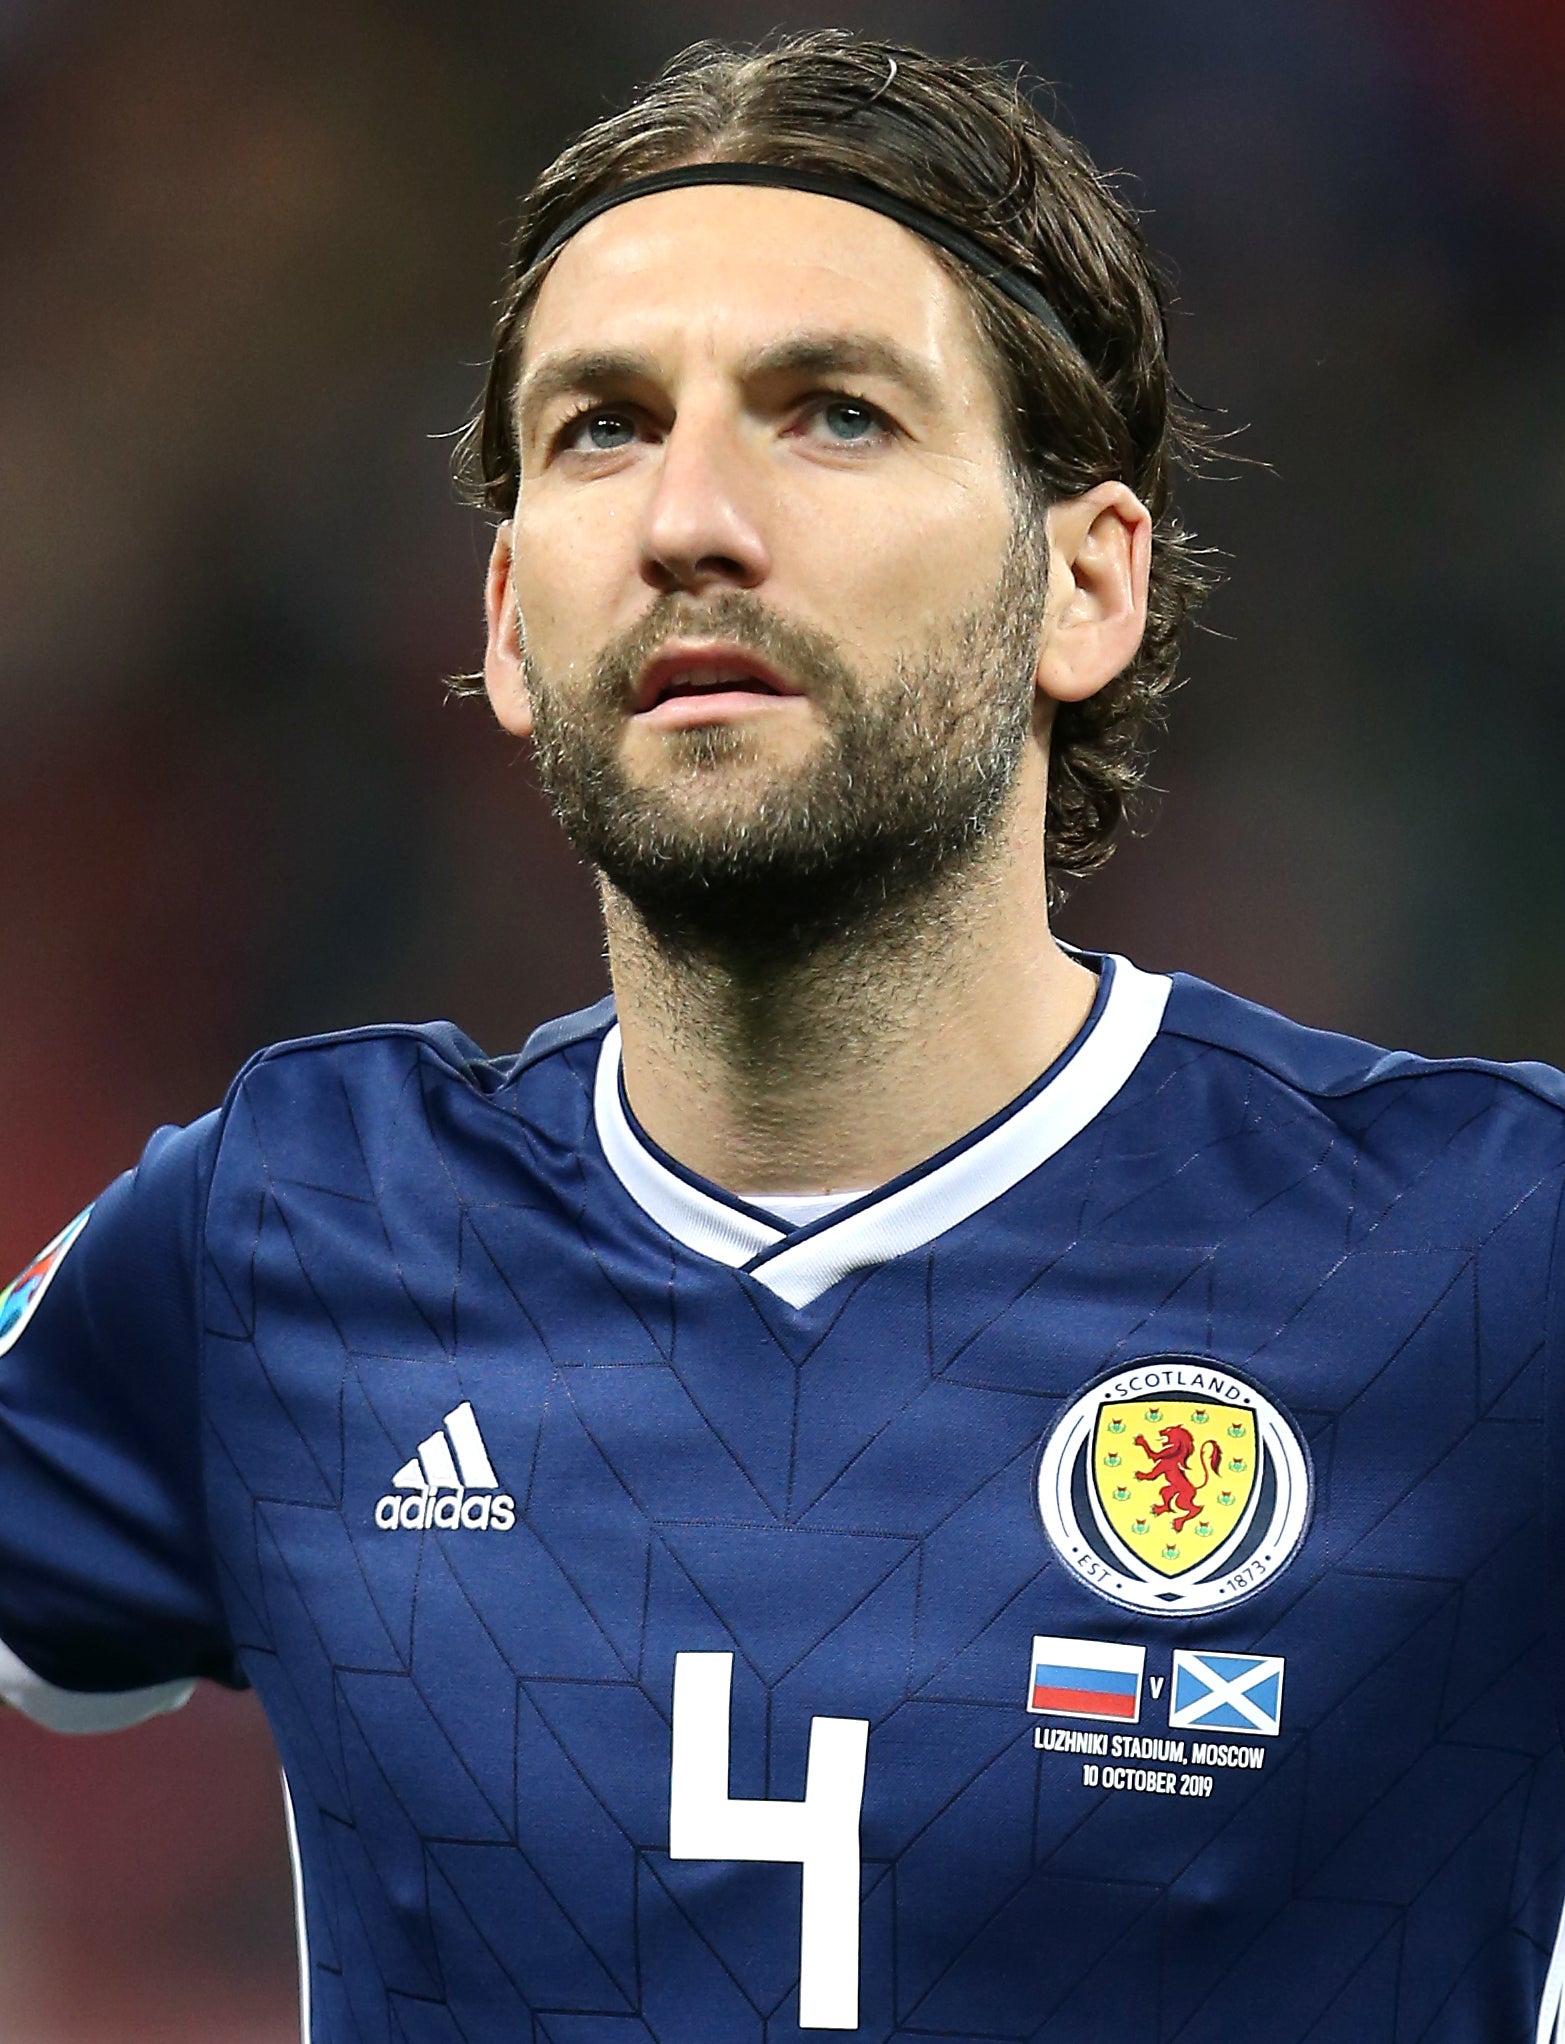 Former Scotland defender Charlie Mulgrew has joined Dundee United